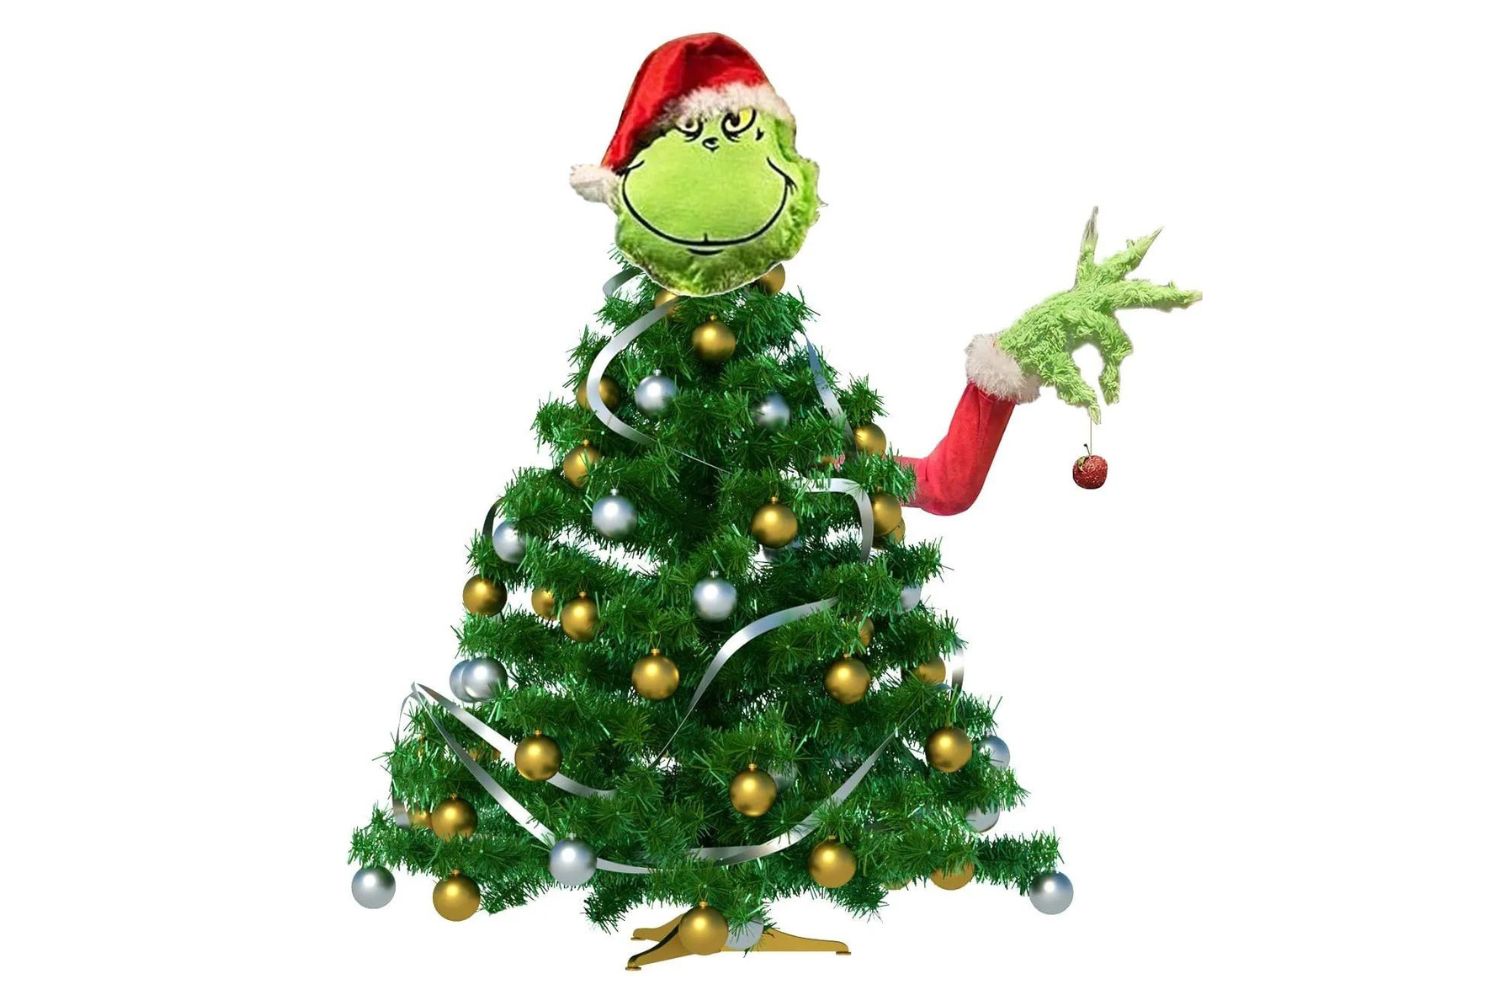 17-enigmatic-facts-about-grinch-christmas-tree